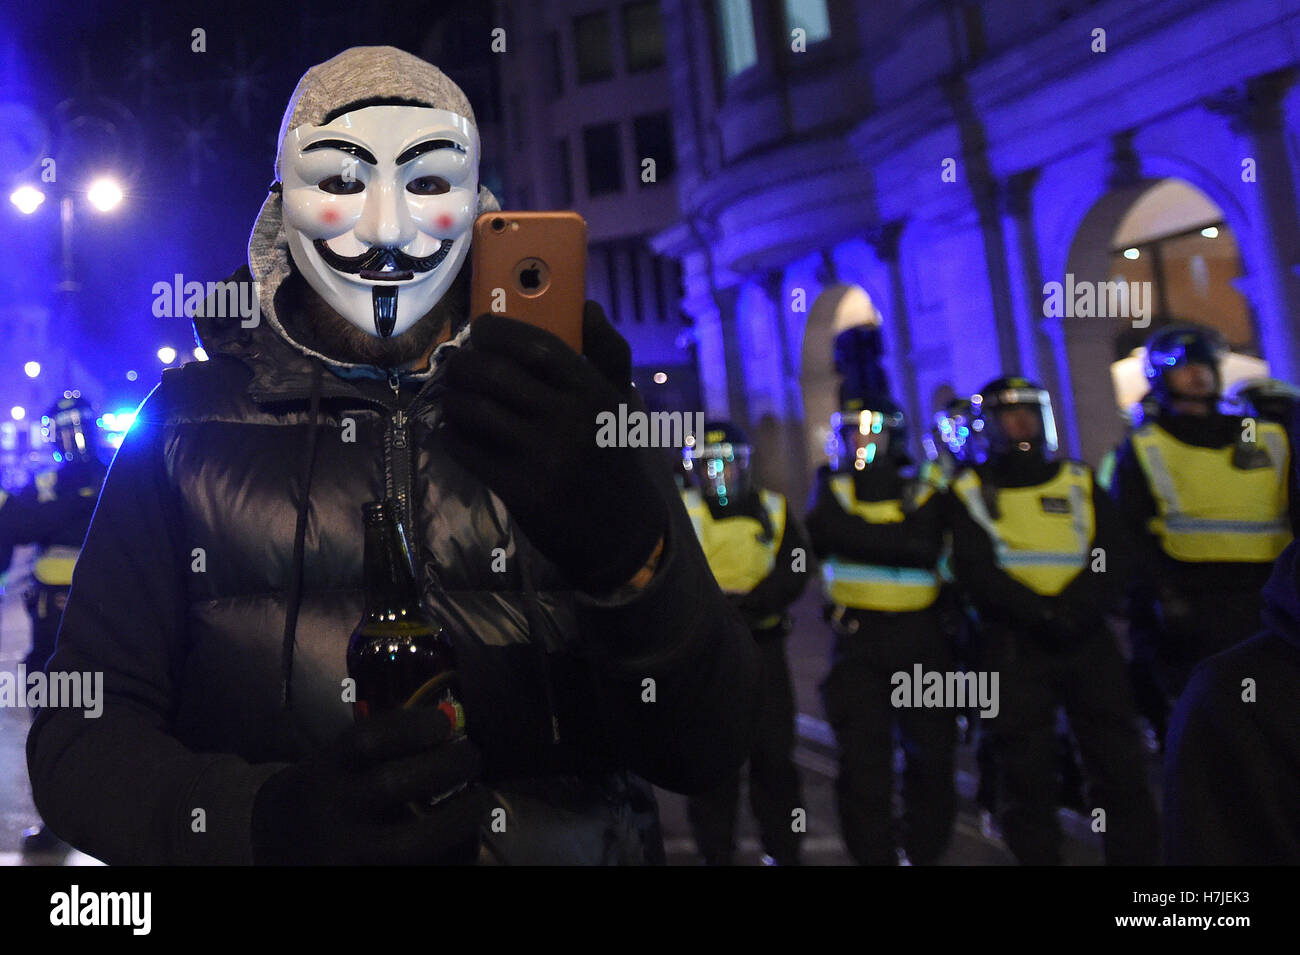 Million Mask March London High Resolution Stock Photography and Images -  Alamy